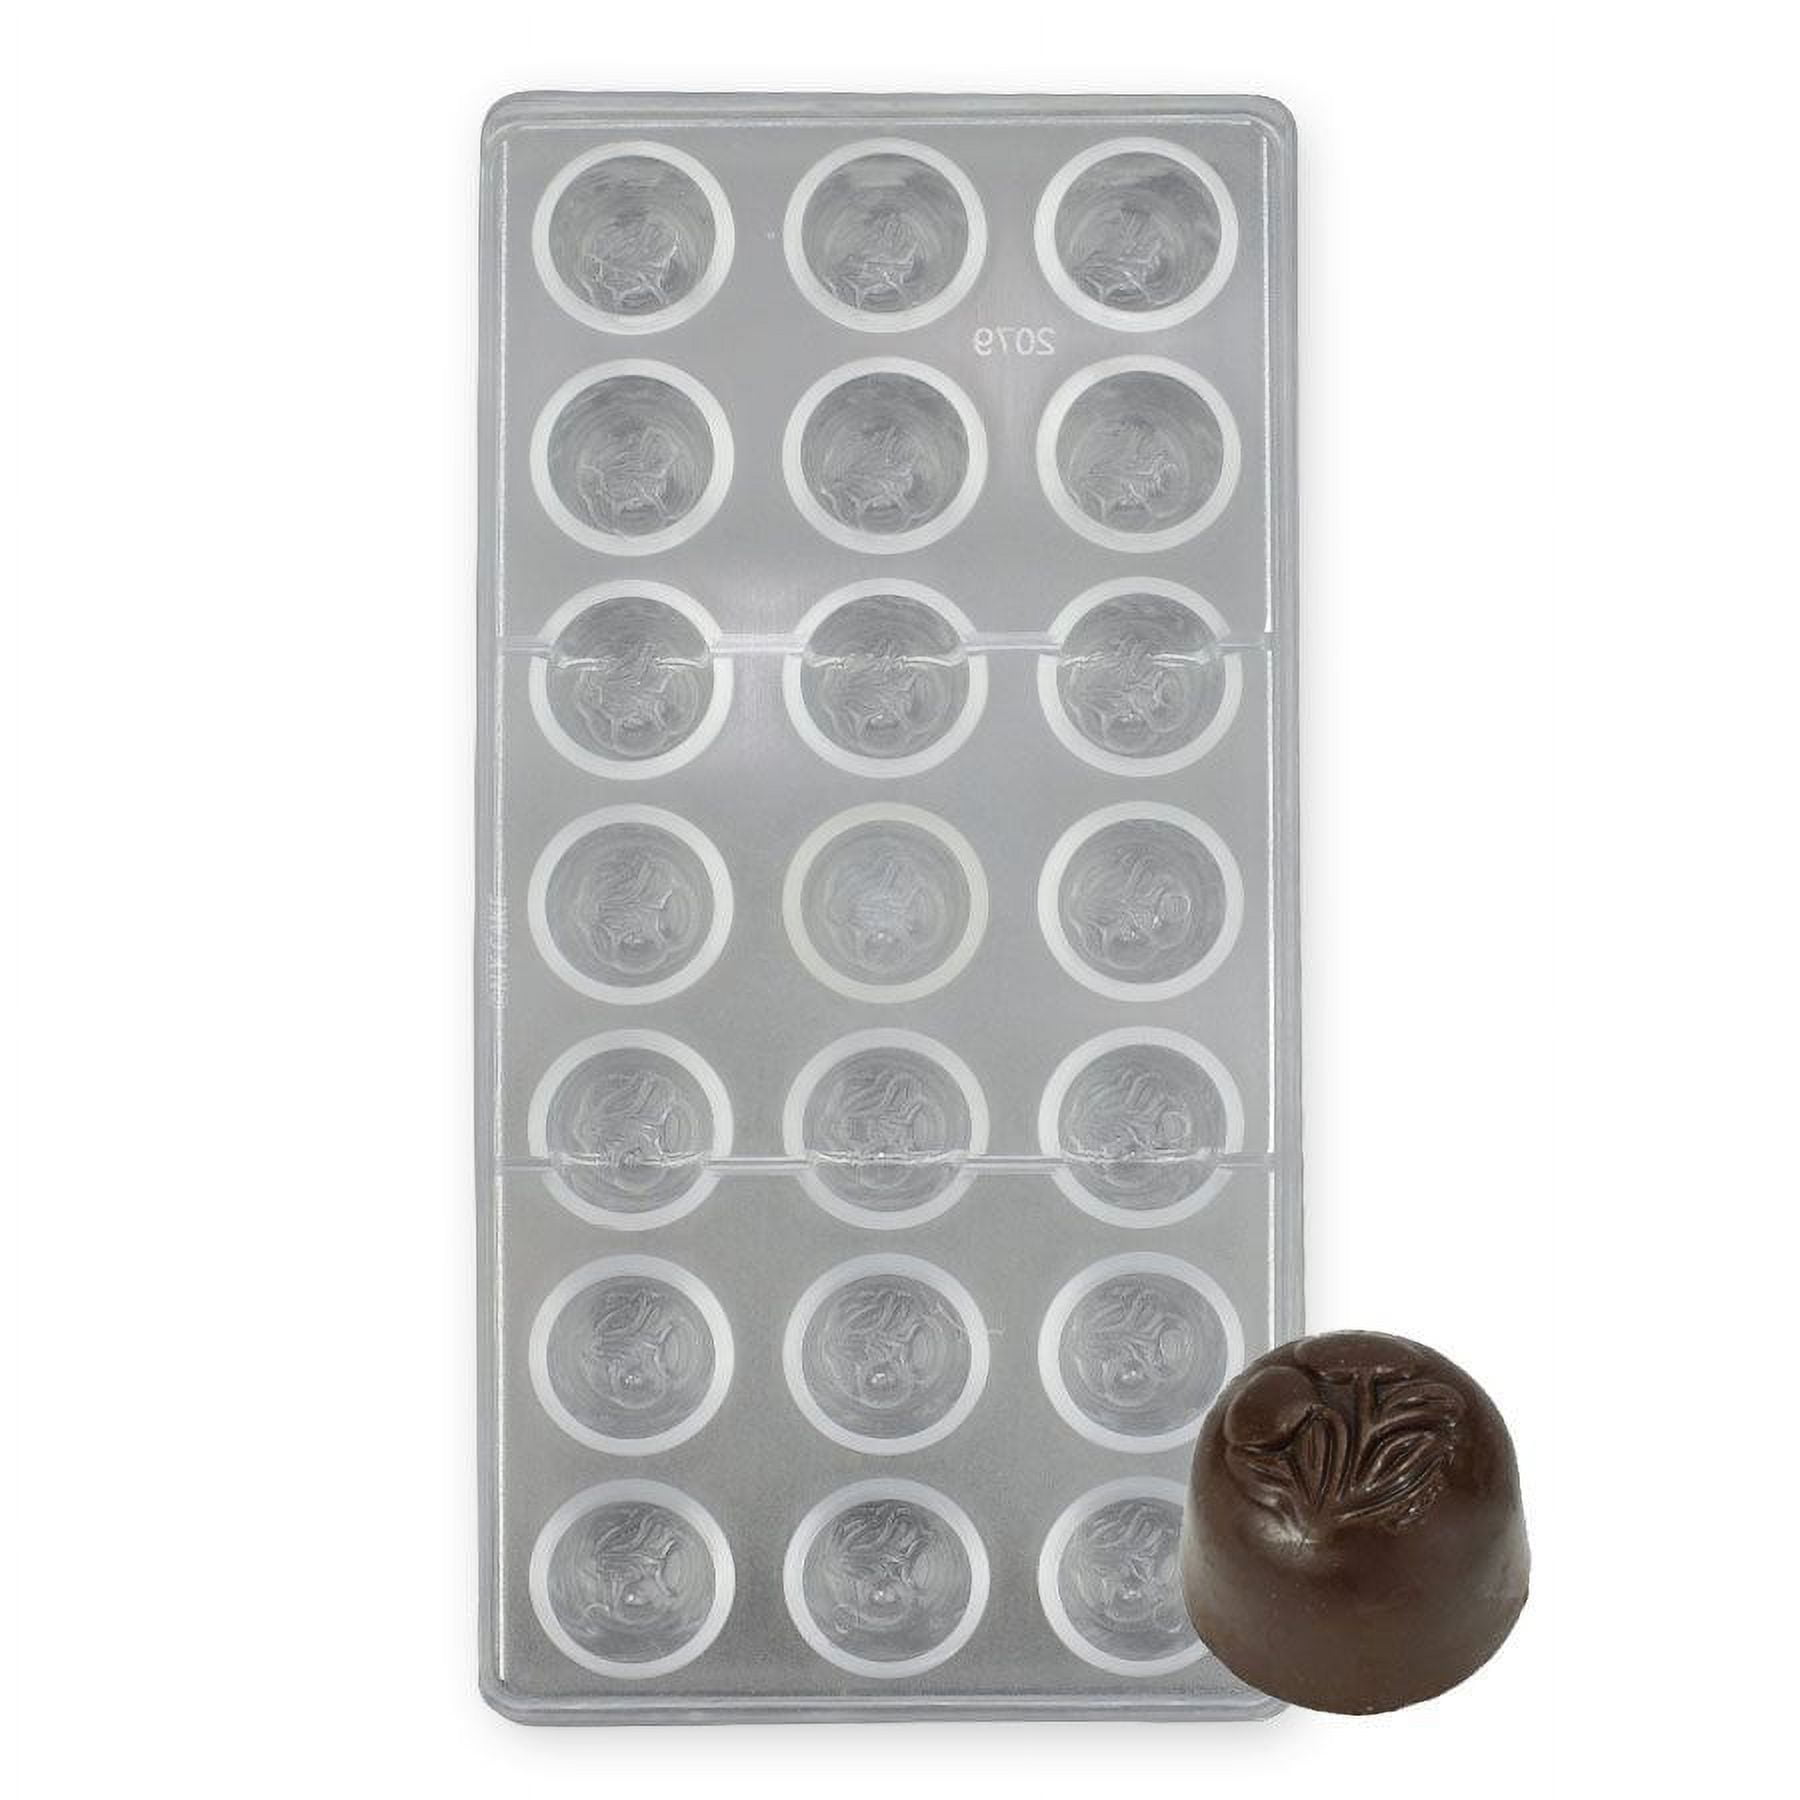 Bobasndm 2 Pack Chocolate Silicone Molds Candy Mold,Rose Flower Shape  Baking Mold Candy Molds BPA Free %26 Non-stick Silicone Tray for Hard Candy  Gummy Bomb Jello Ice Cube Small Soap 